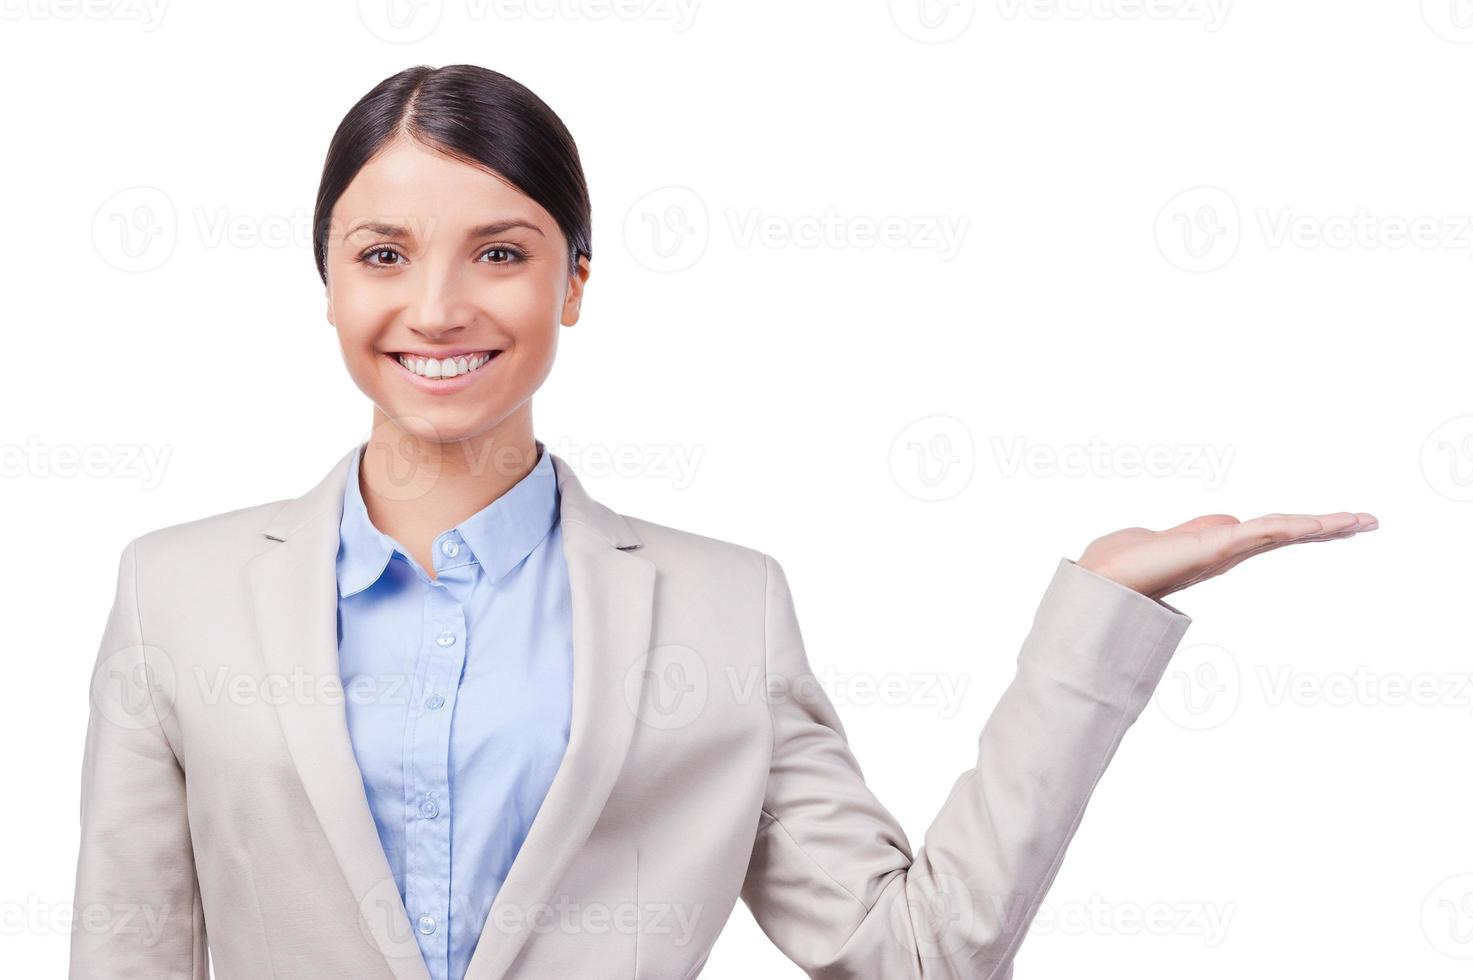 Your advertisement on her hand. Smiling young businesswoman holding copy space while standing against white background photo